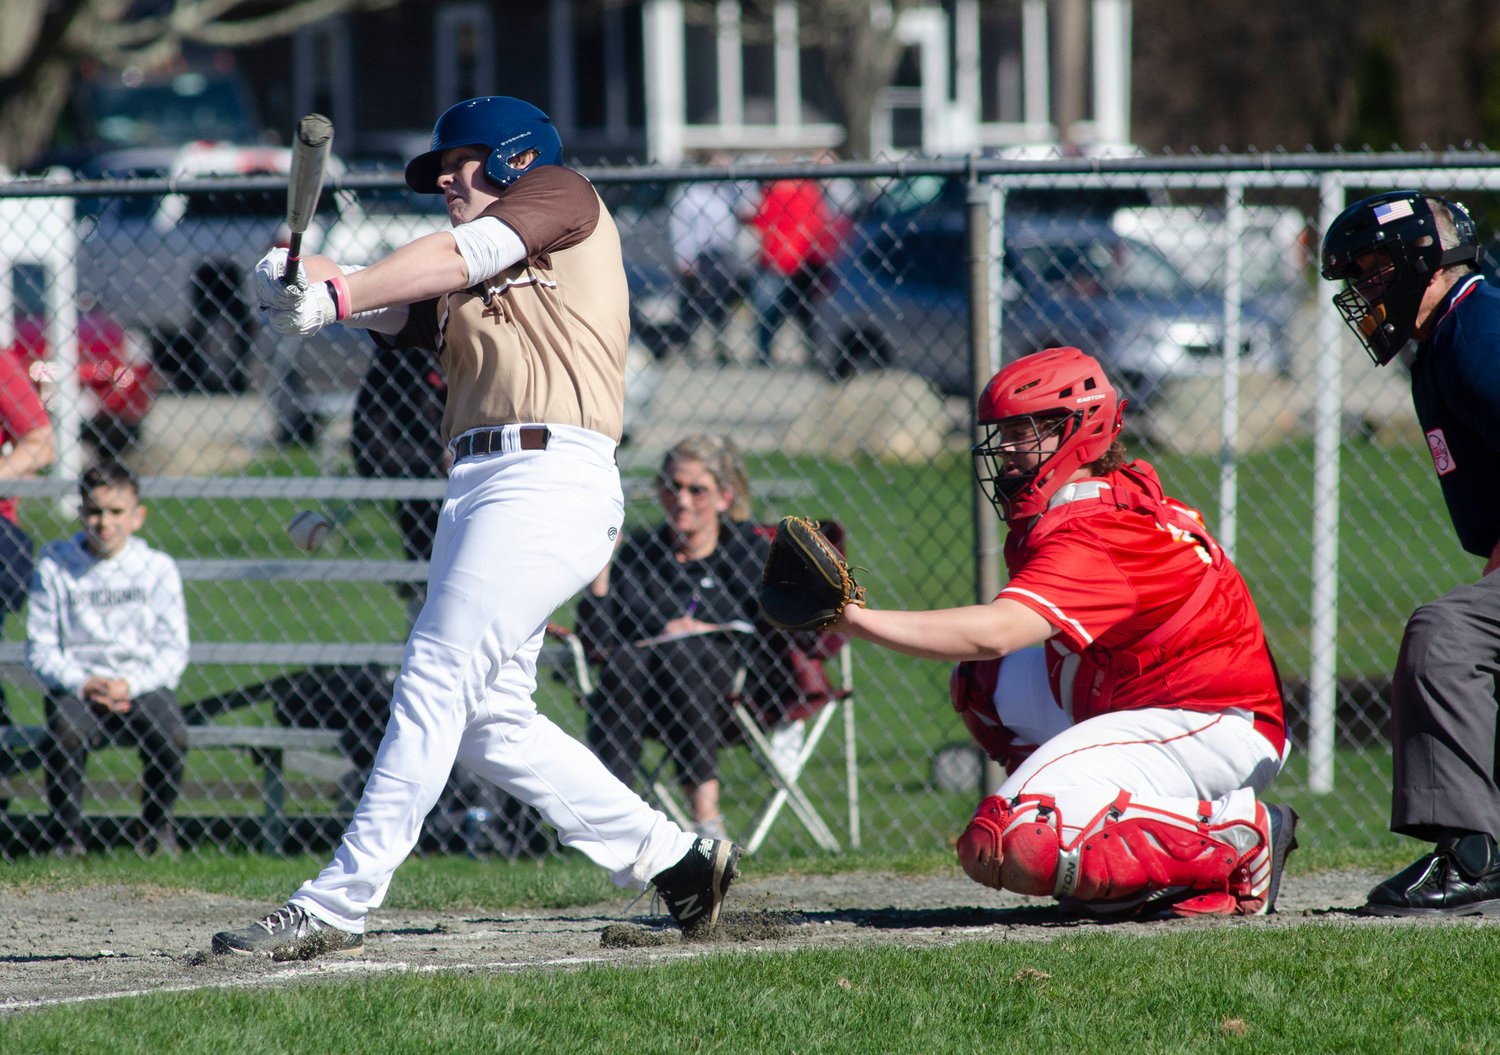 Connor James swings at a pitch during the game. The clean up hitter drove in two runs in the Wildcats big fifth inning.